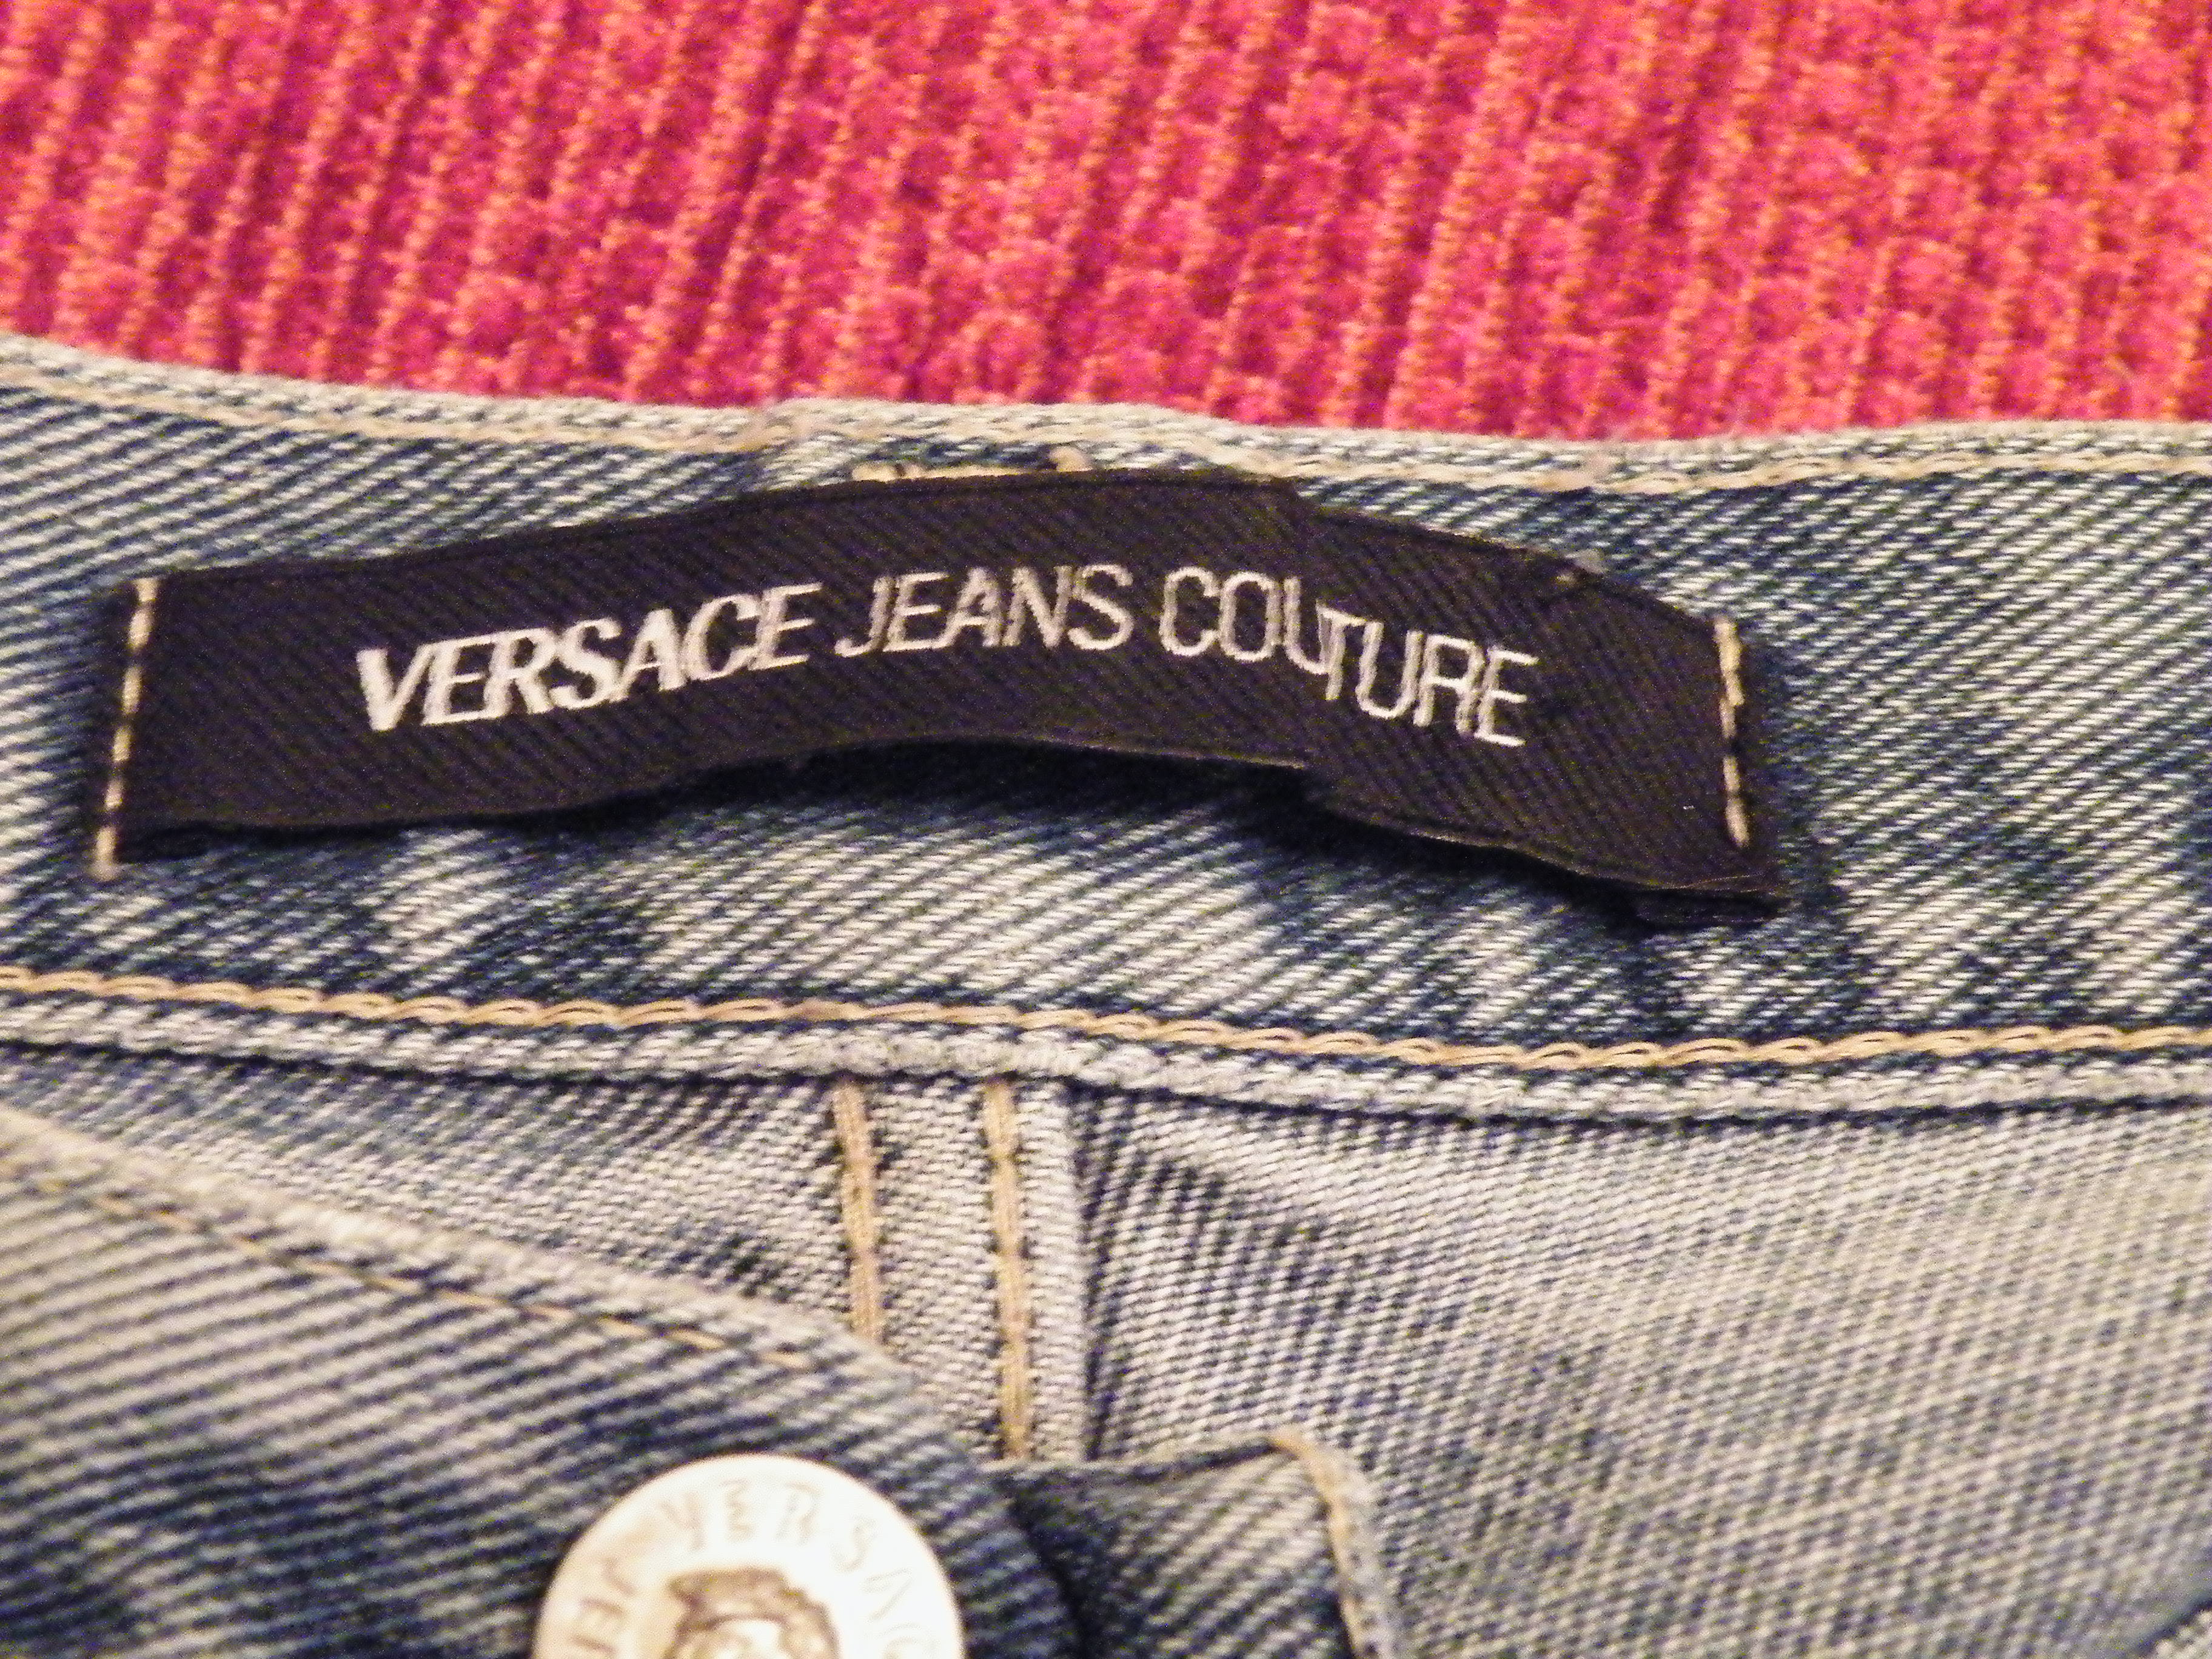 Can anyone tell me if these Versace Jeans are real or fake ? | Styleforum